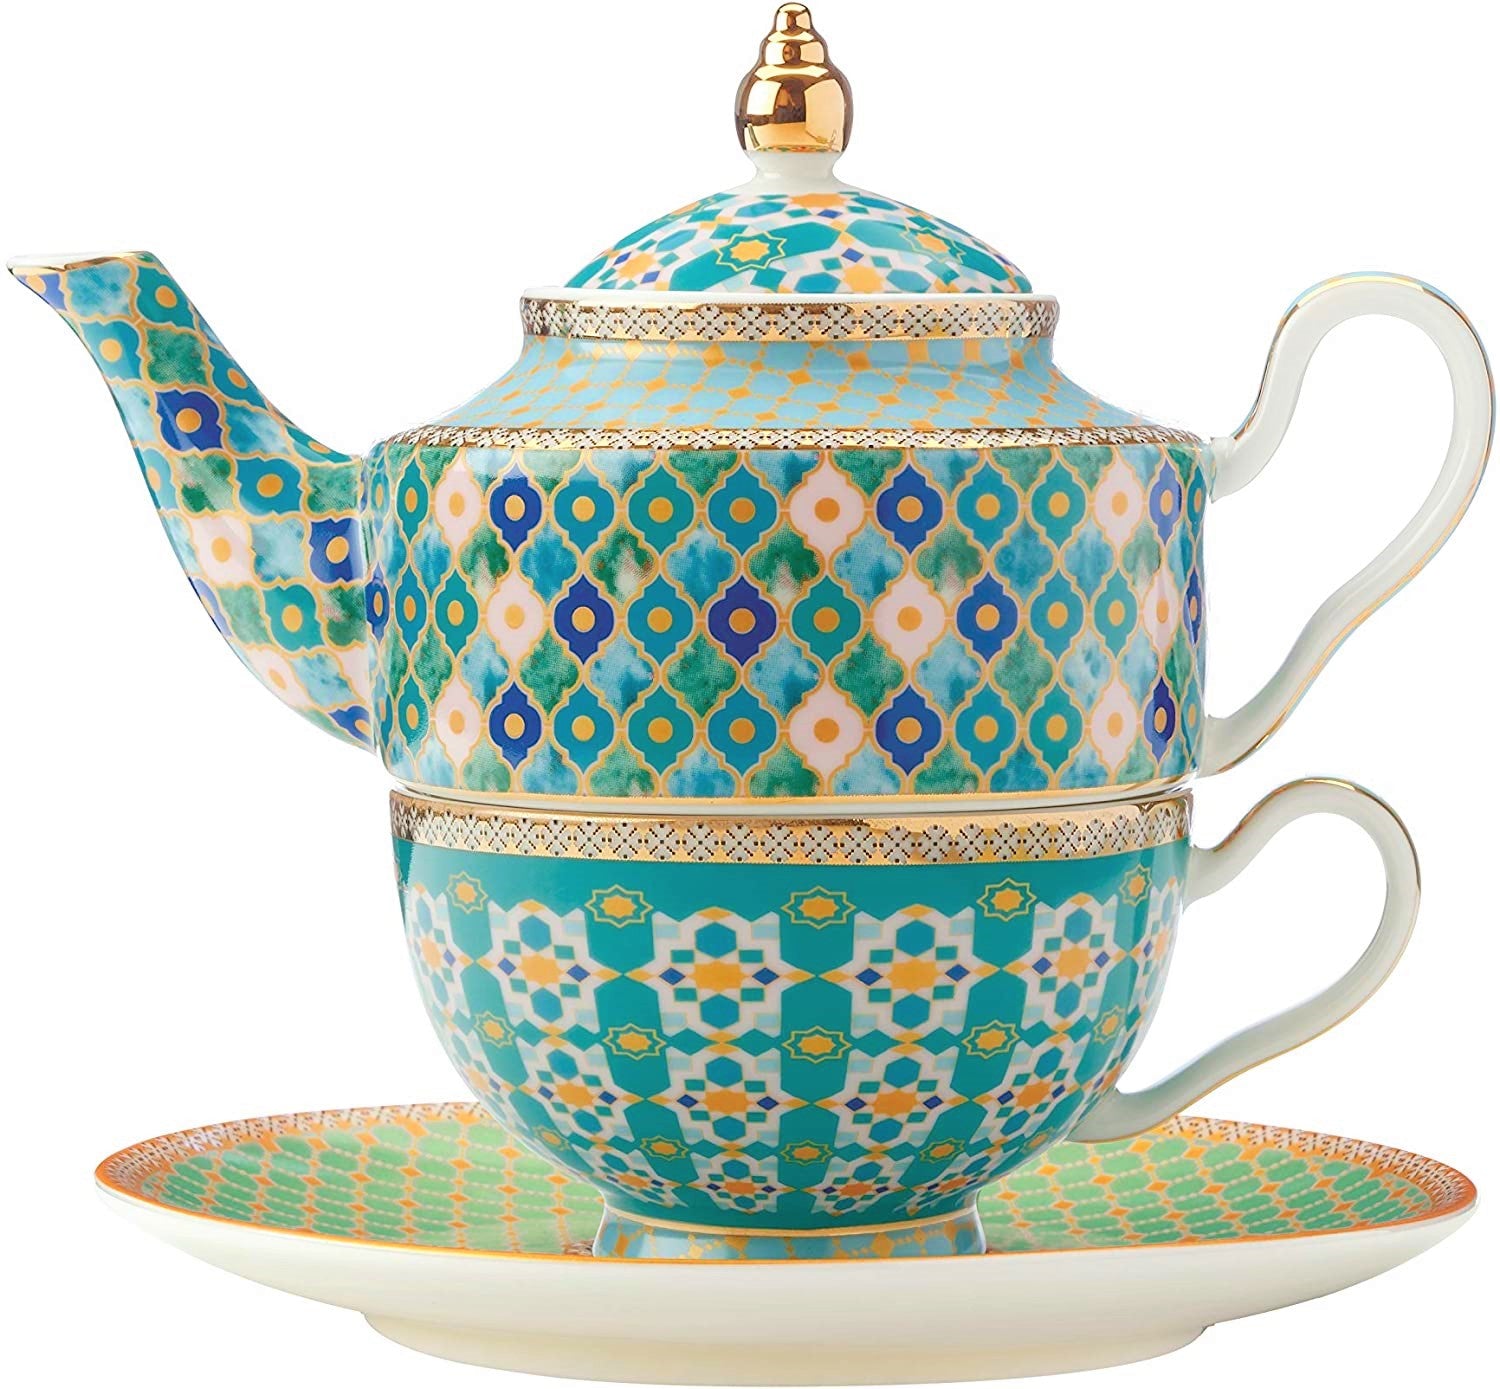 "KASBAH" TEA FOR 1 WITH INFUSER by Teas & C's | 380ml